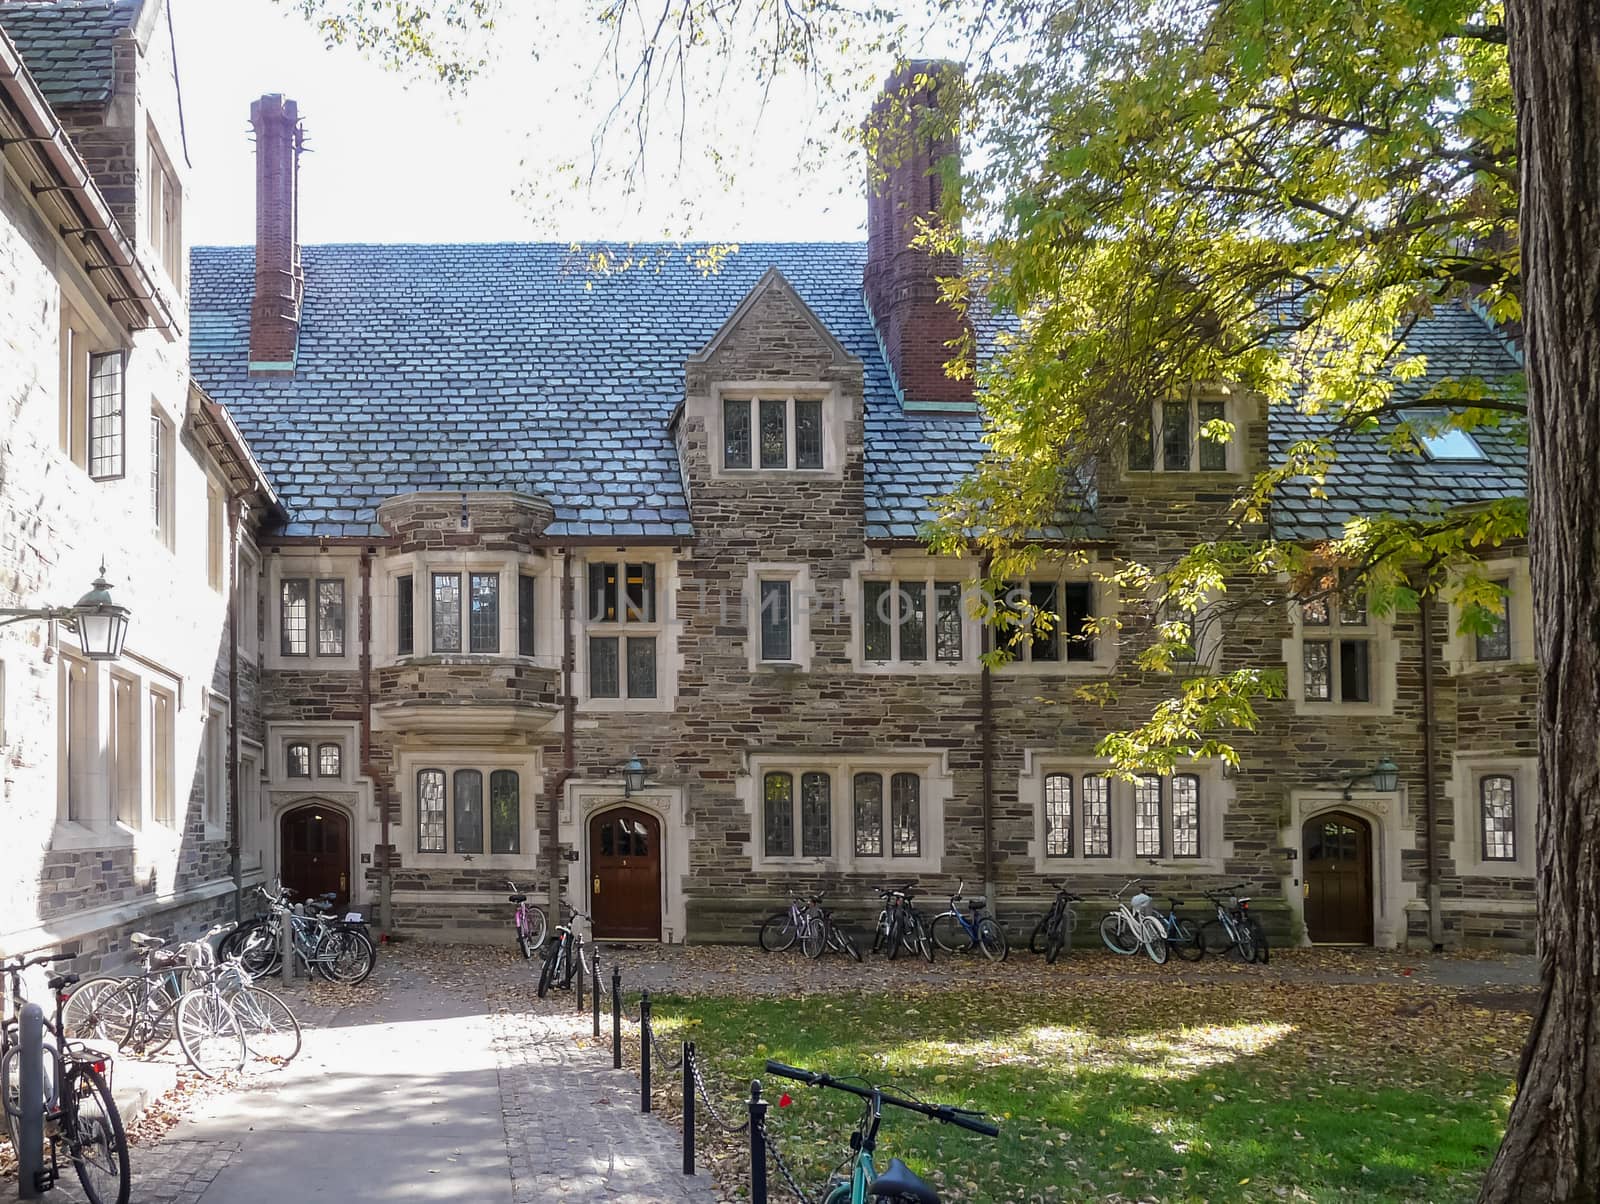 Bicycles in campus at Princeton University by wit_gorski